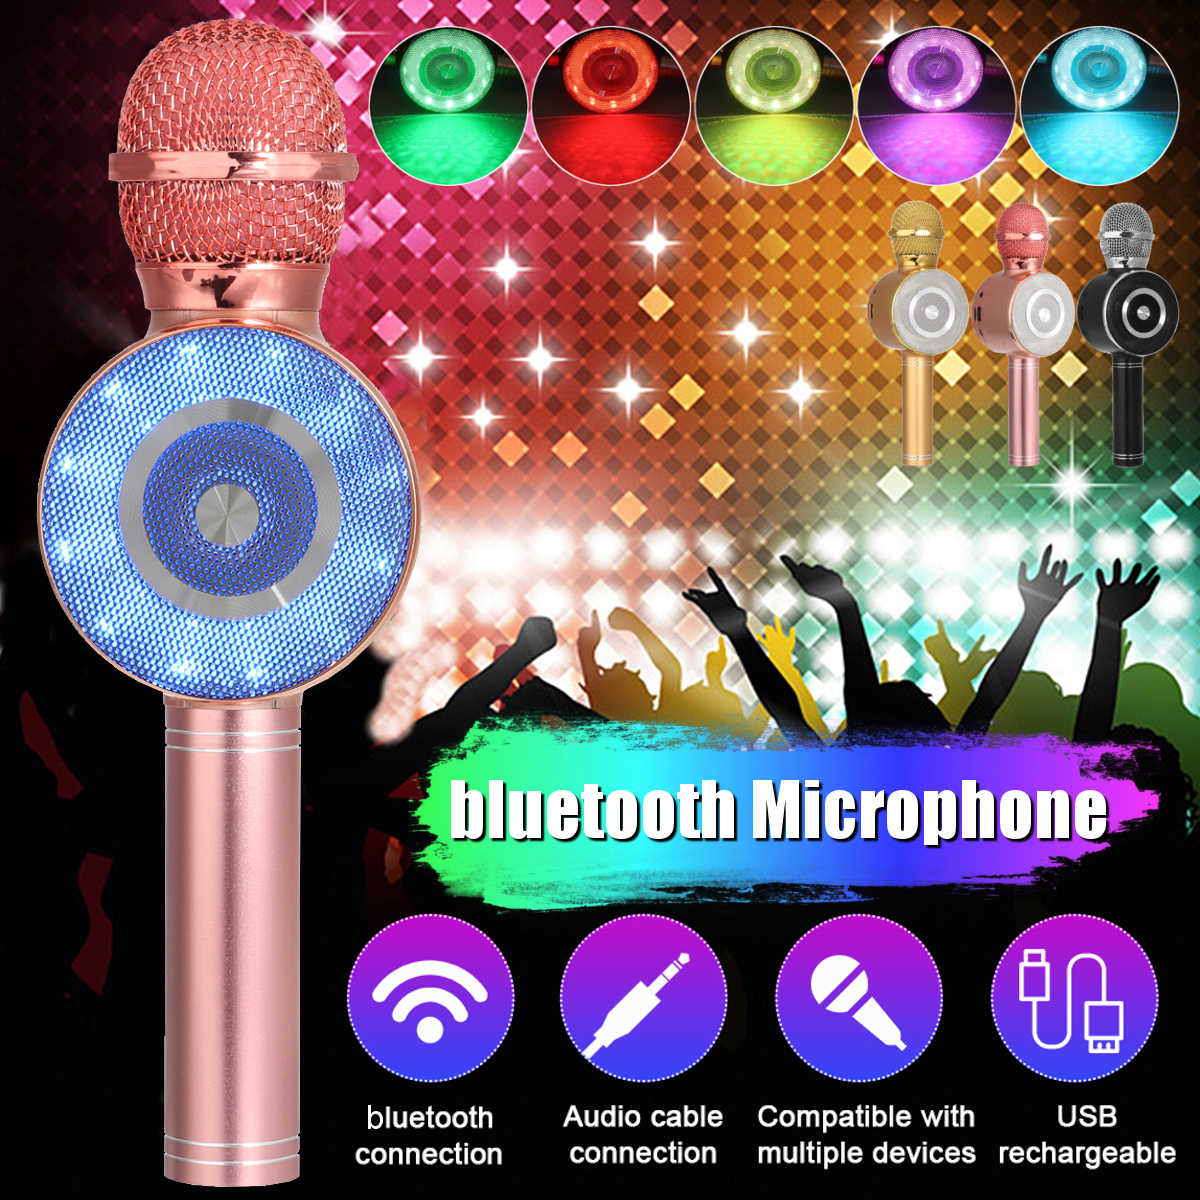 Bakeey Karaoke Wireless Microphone 13W*2 HIFI Stereo Speaker DSP Noise Reduction TF Card AUX-In 2600mAh Luminous Portable Handheld Mic Recorder for Party Singing KTV